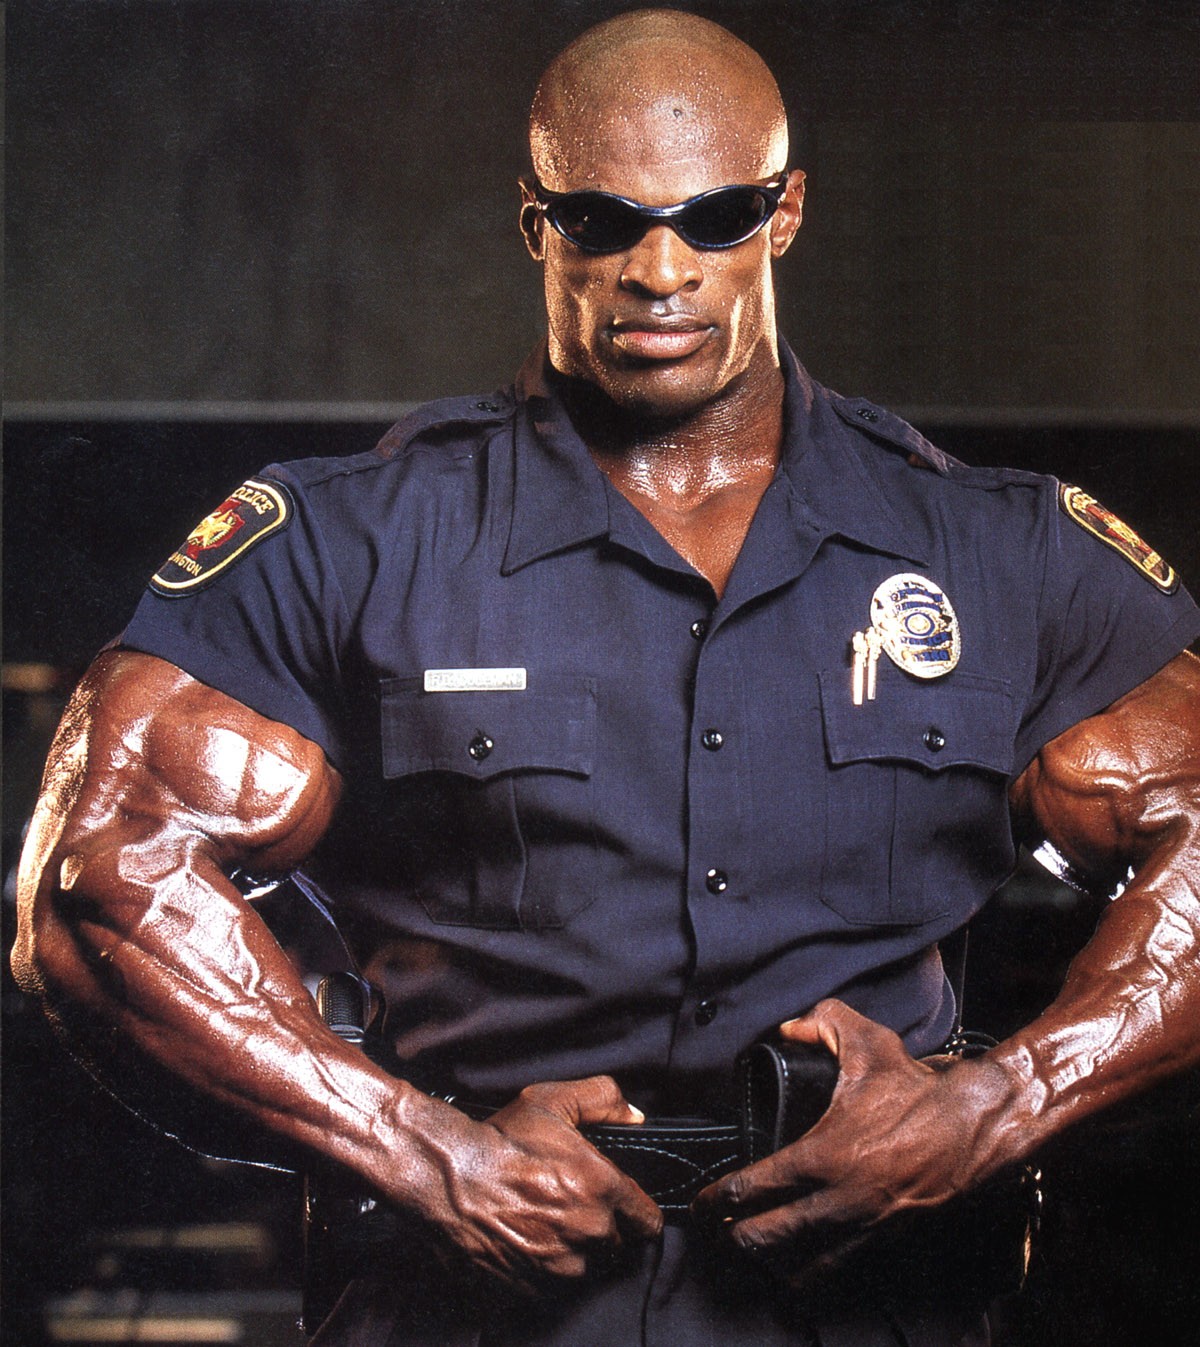 Black People Men Police Wallpaper And Background